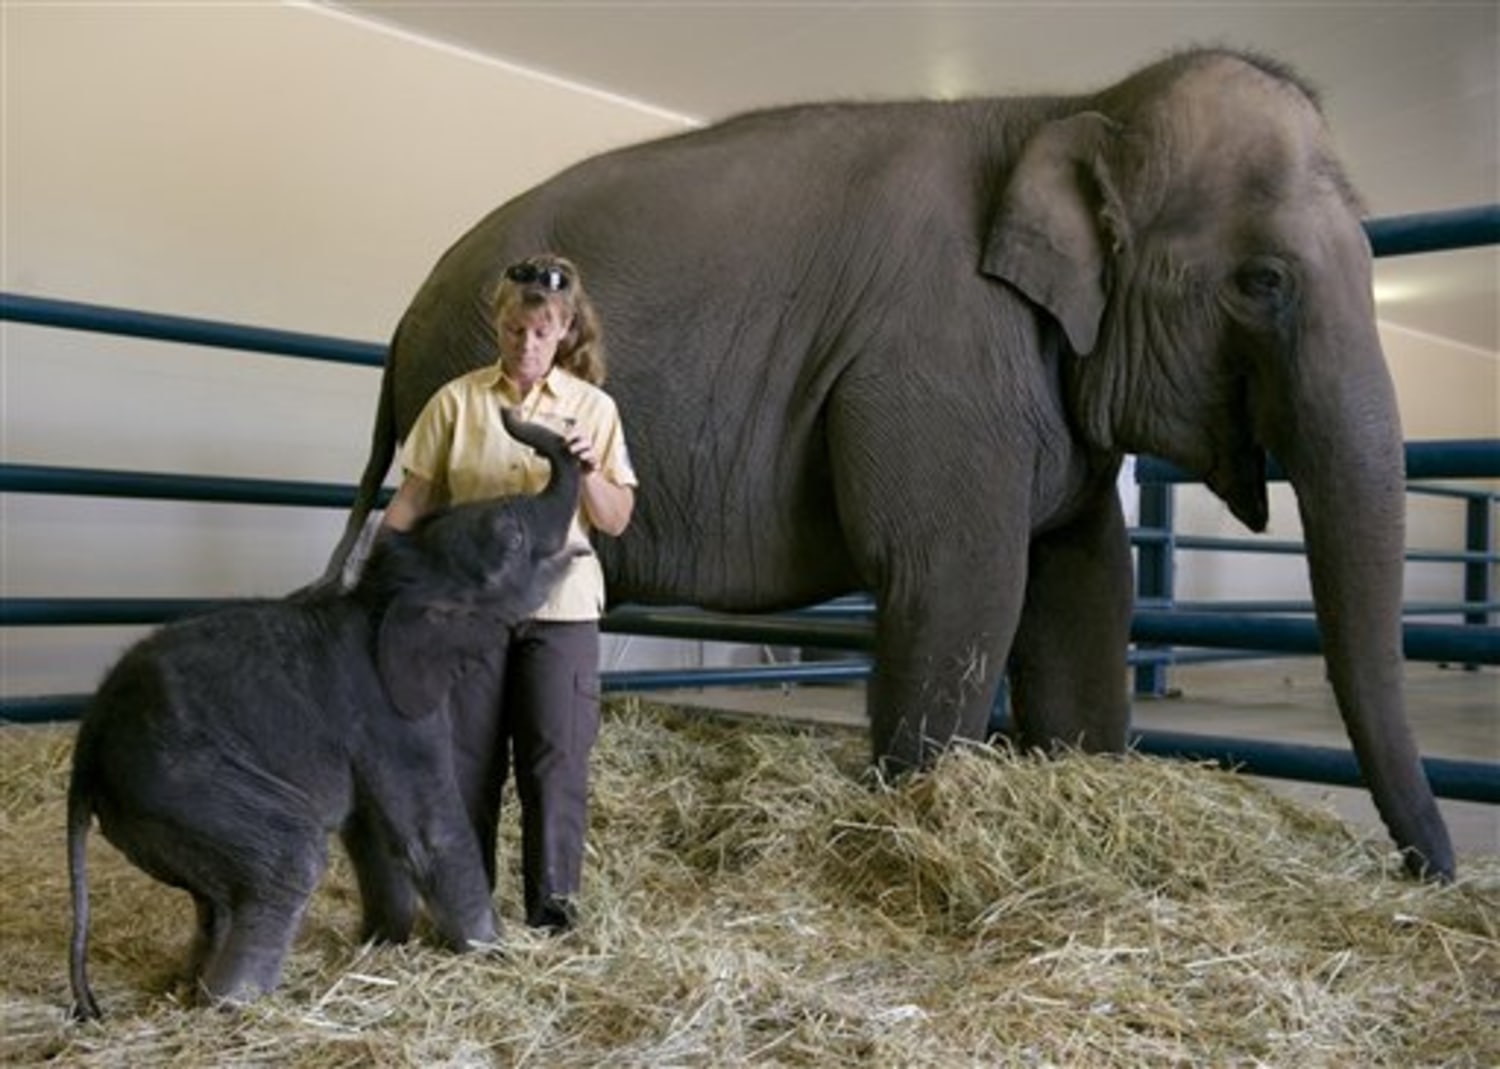 Cruelty-to-elephants circus case heads to trial